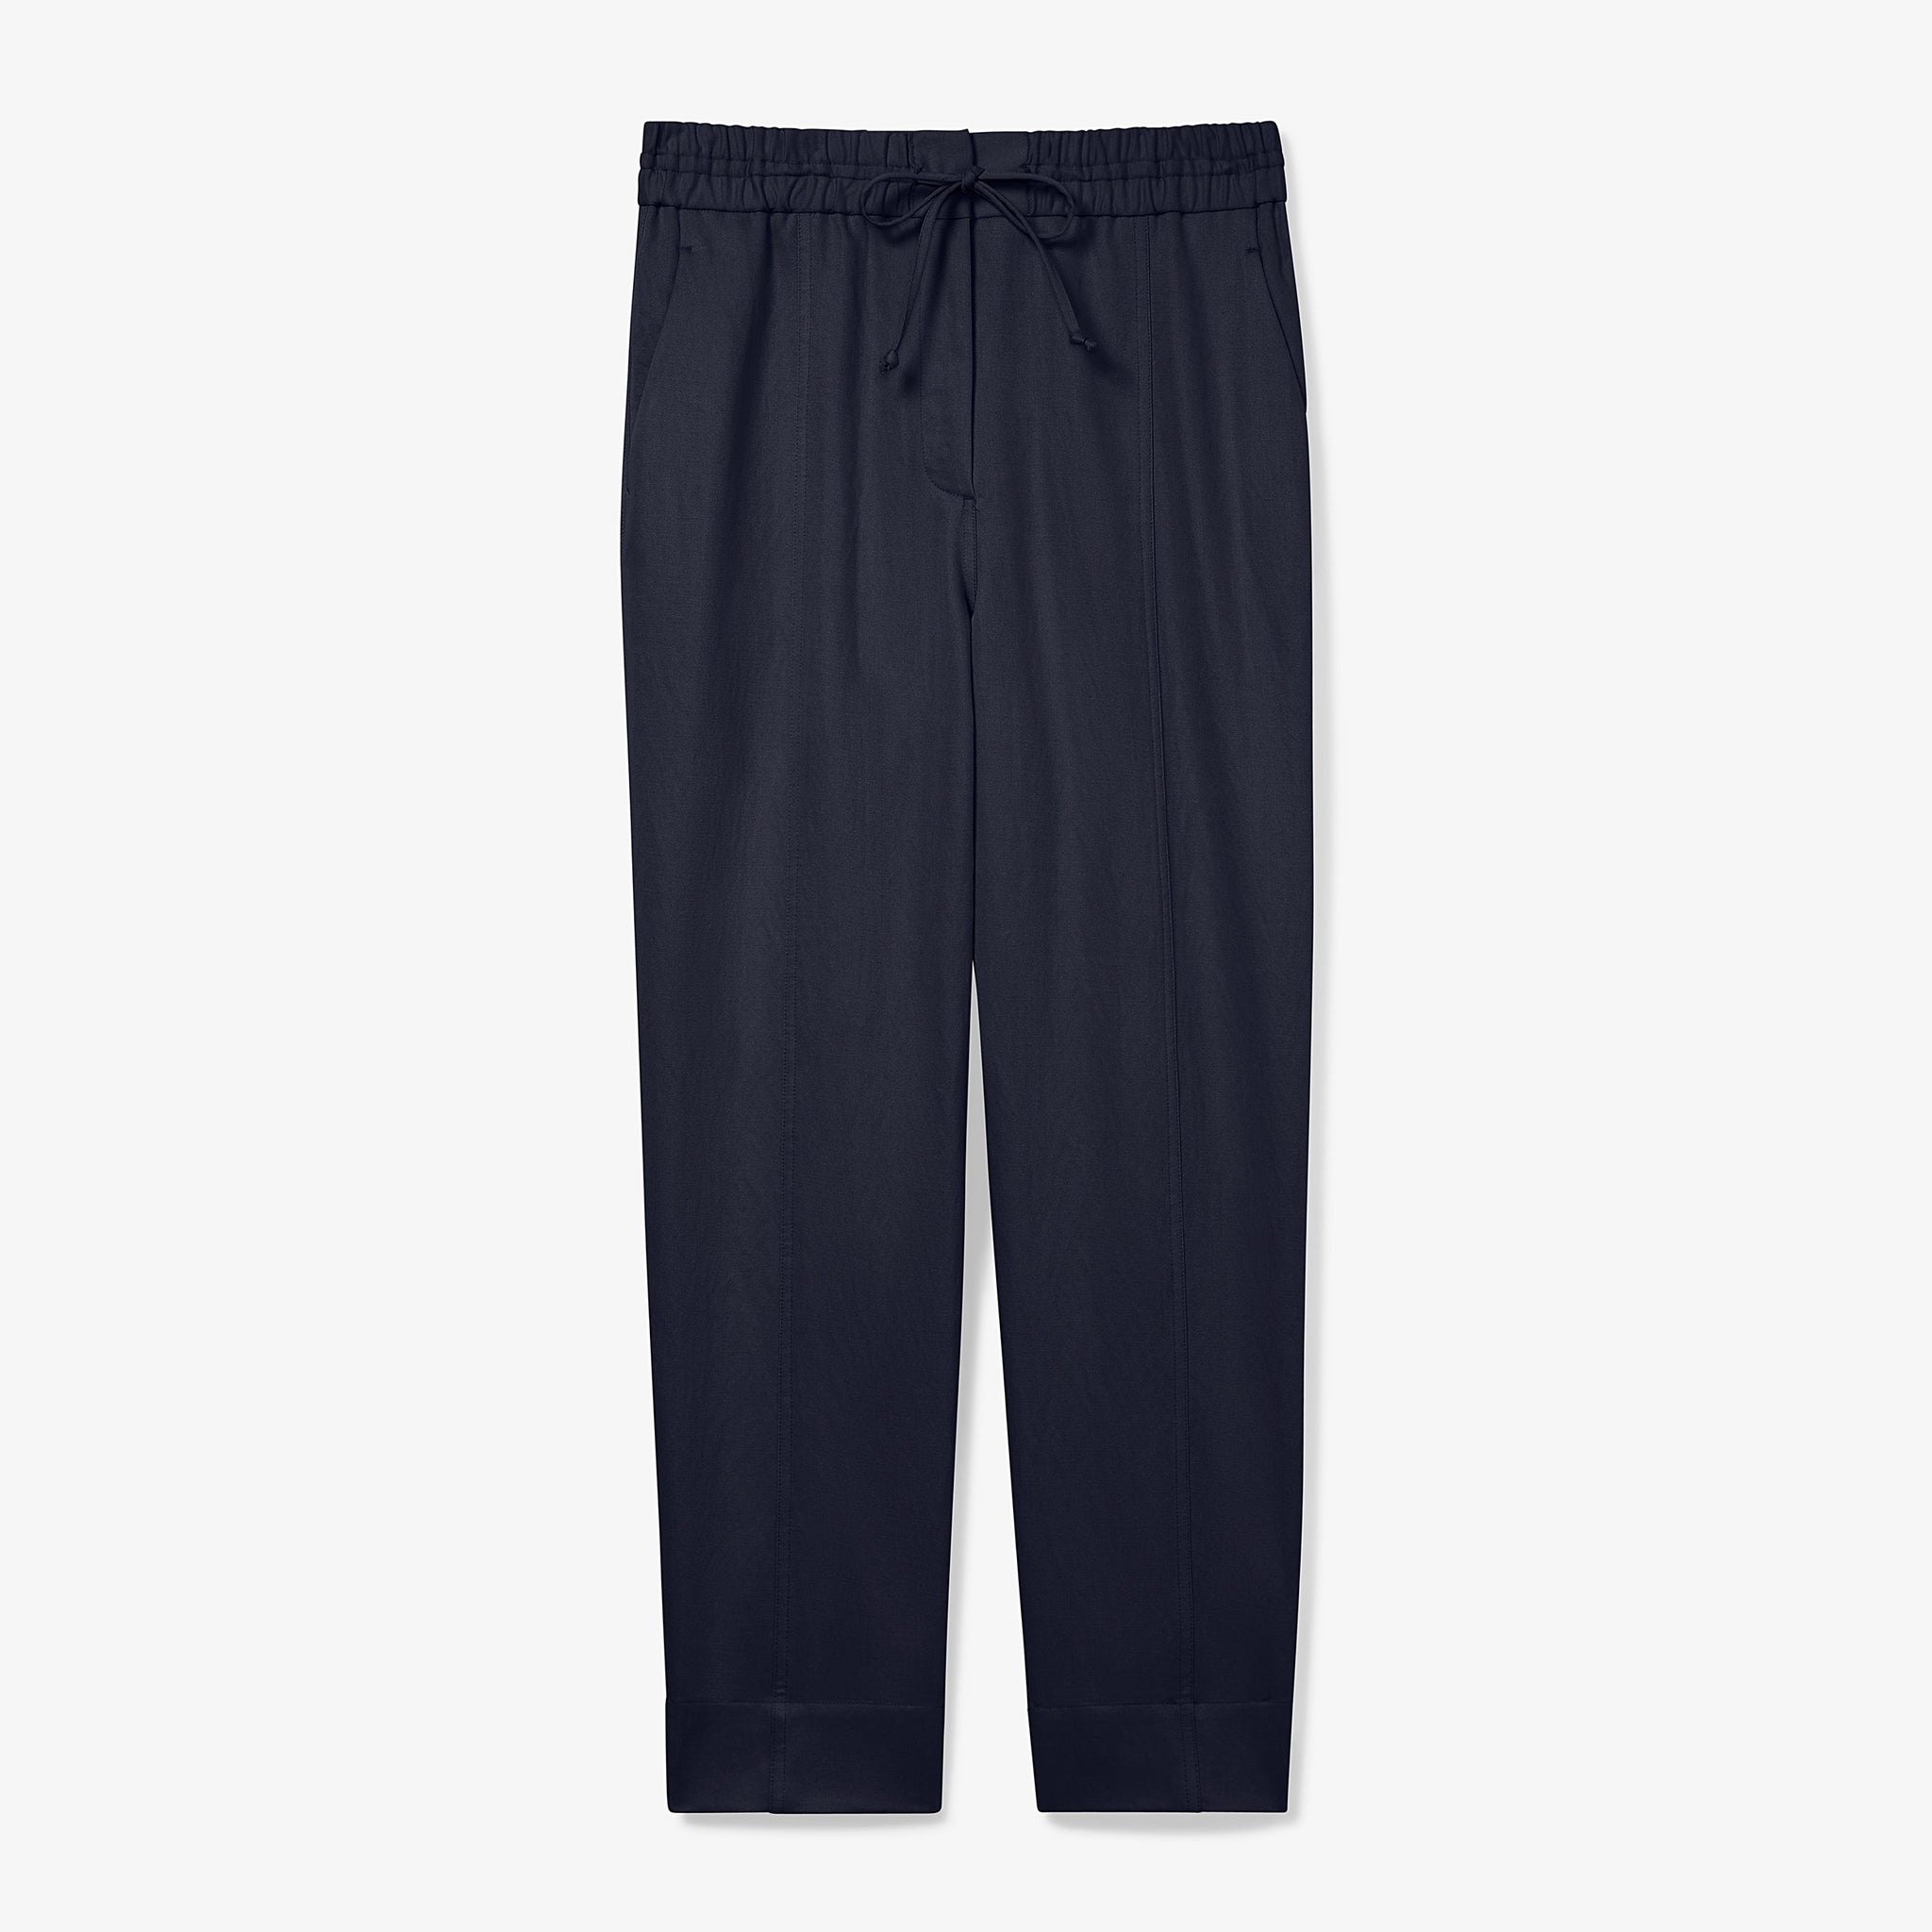 Packshot image of the Shane Pant - Everyday Twill in Night